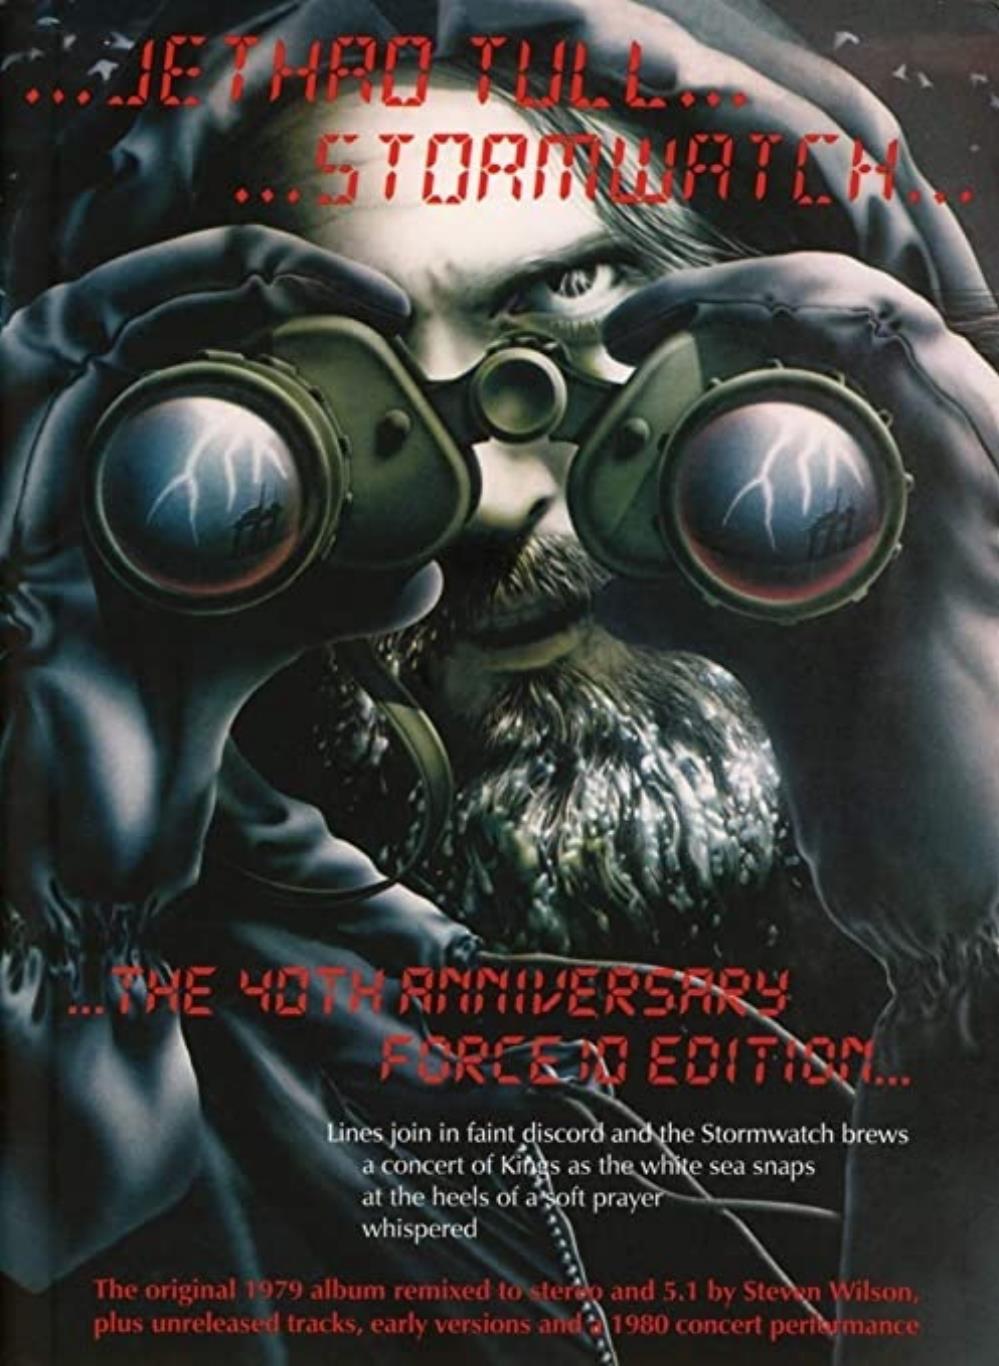 Jethro Tull Stormwatch (The 40th Anniversary Force 10 Edition) album cover